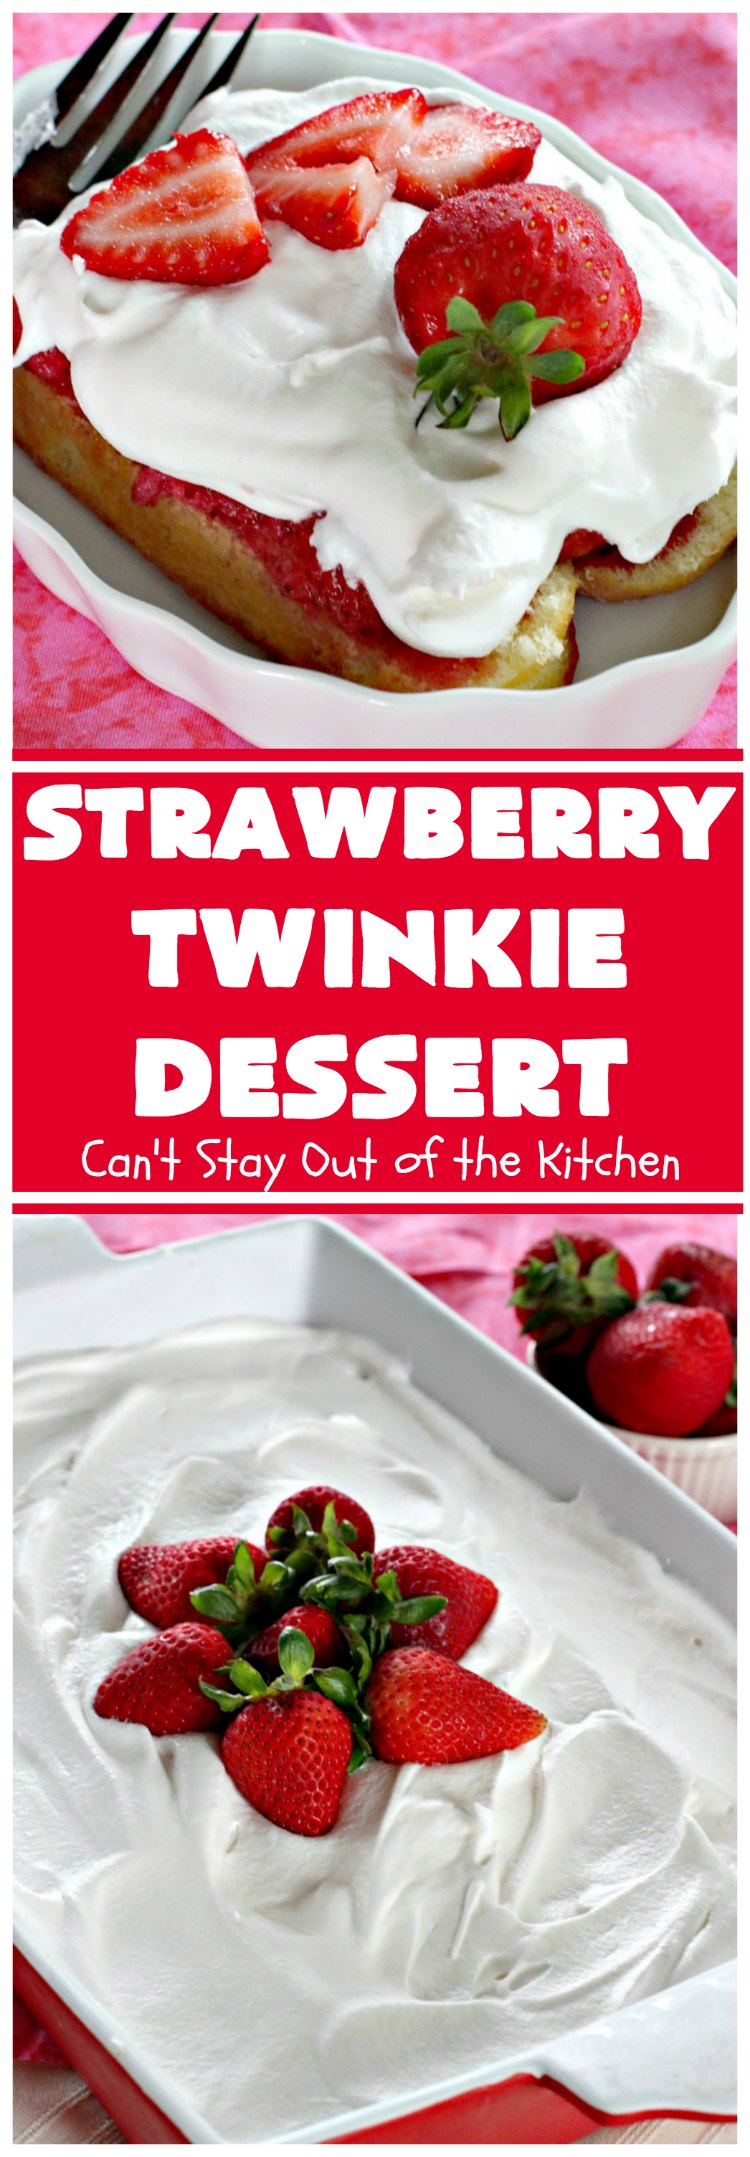 Strawberry Twinkie Dessert | Can't Stay Out of the Kitchen